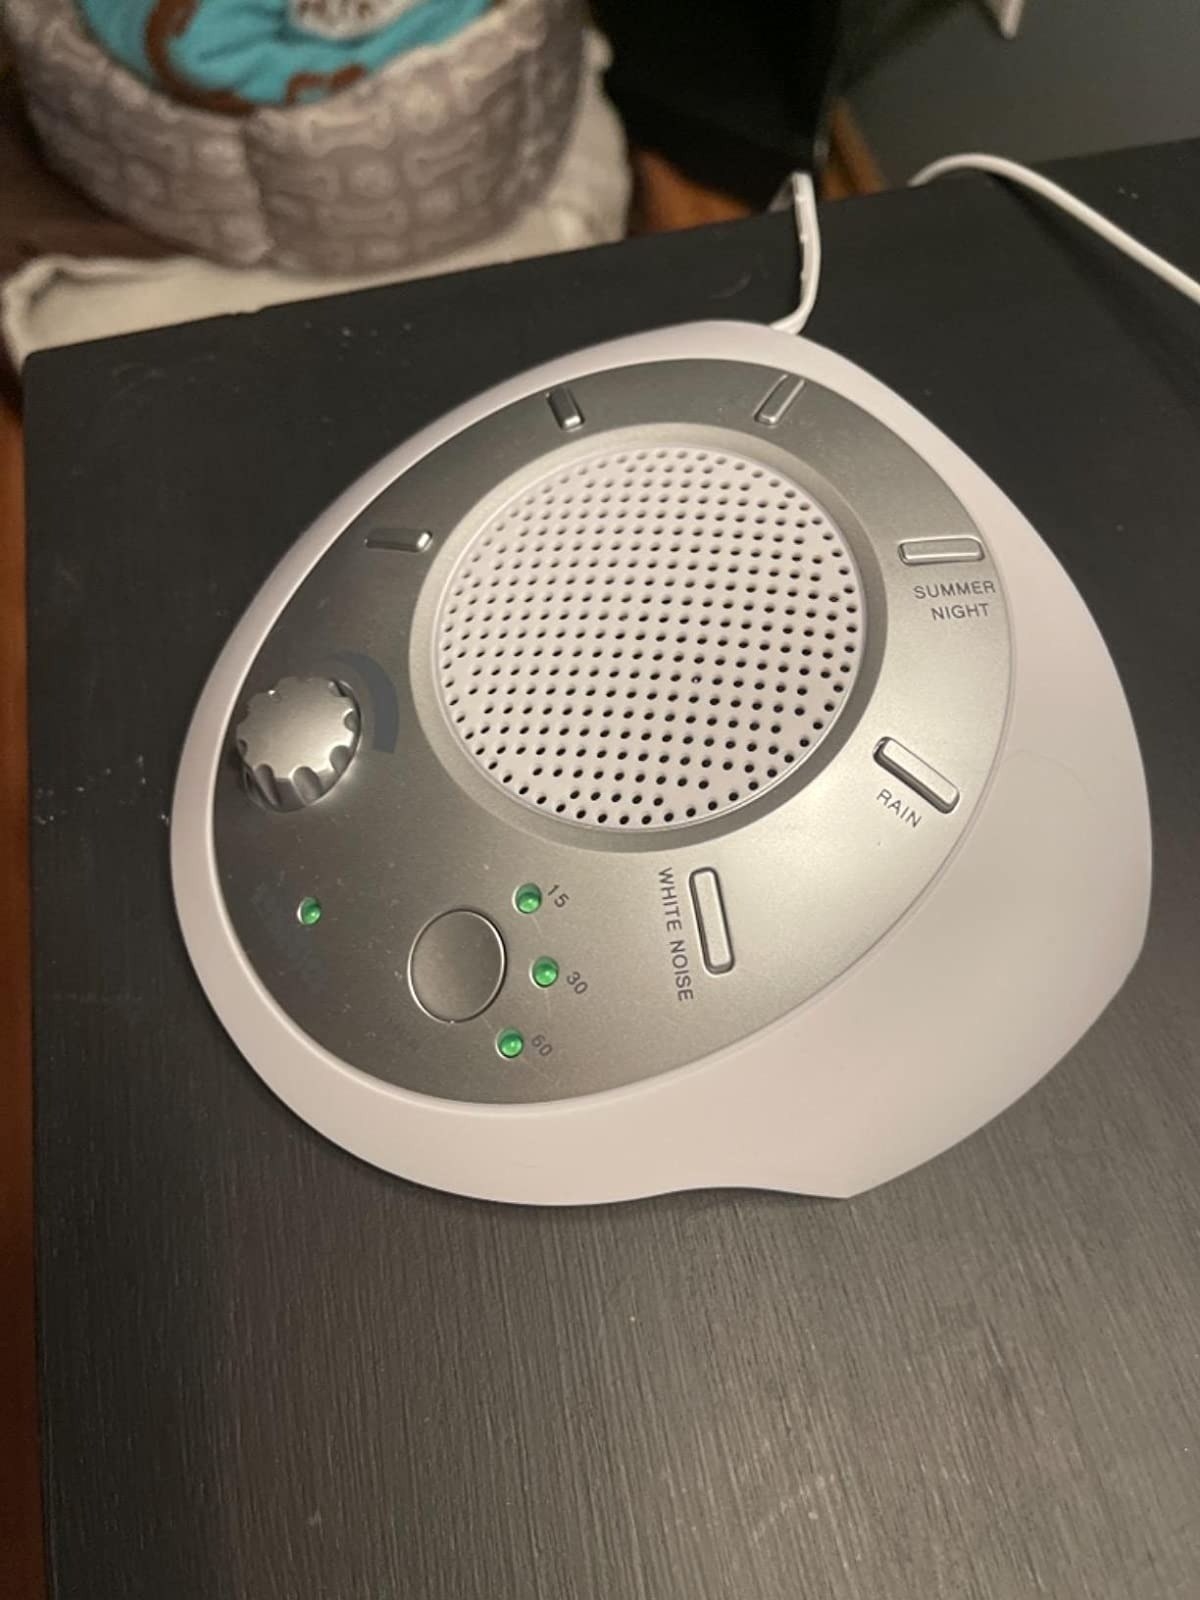 White noise machine plugged in